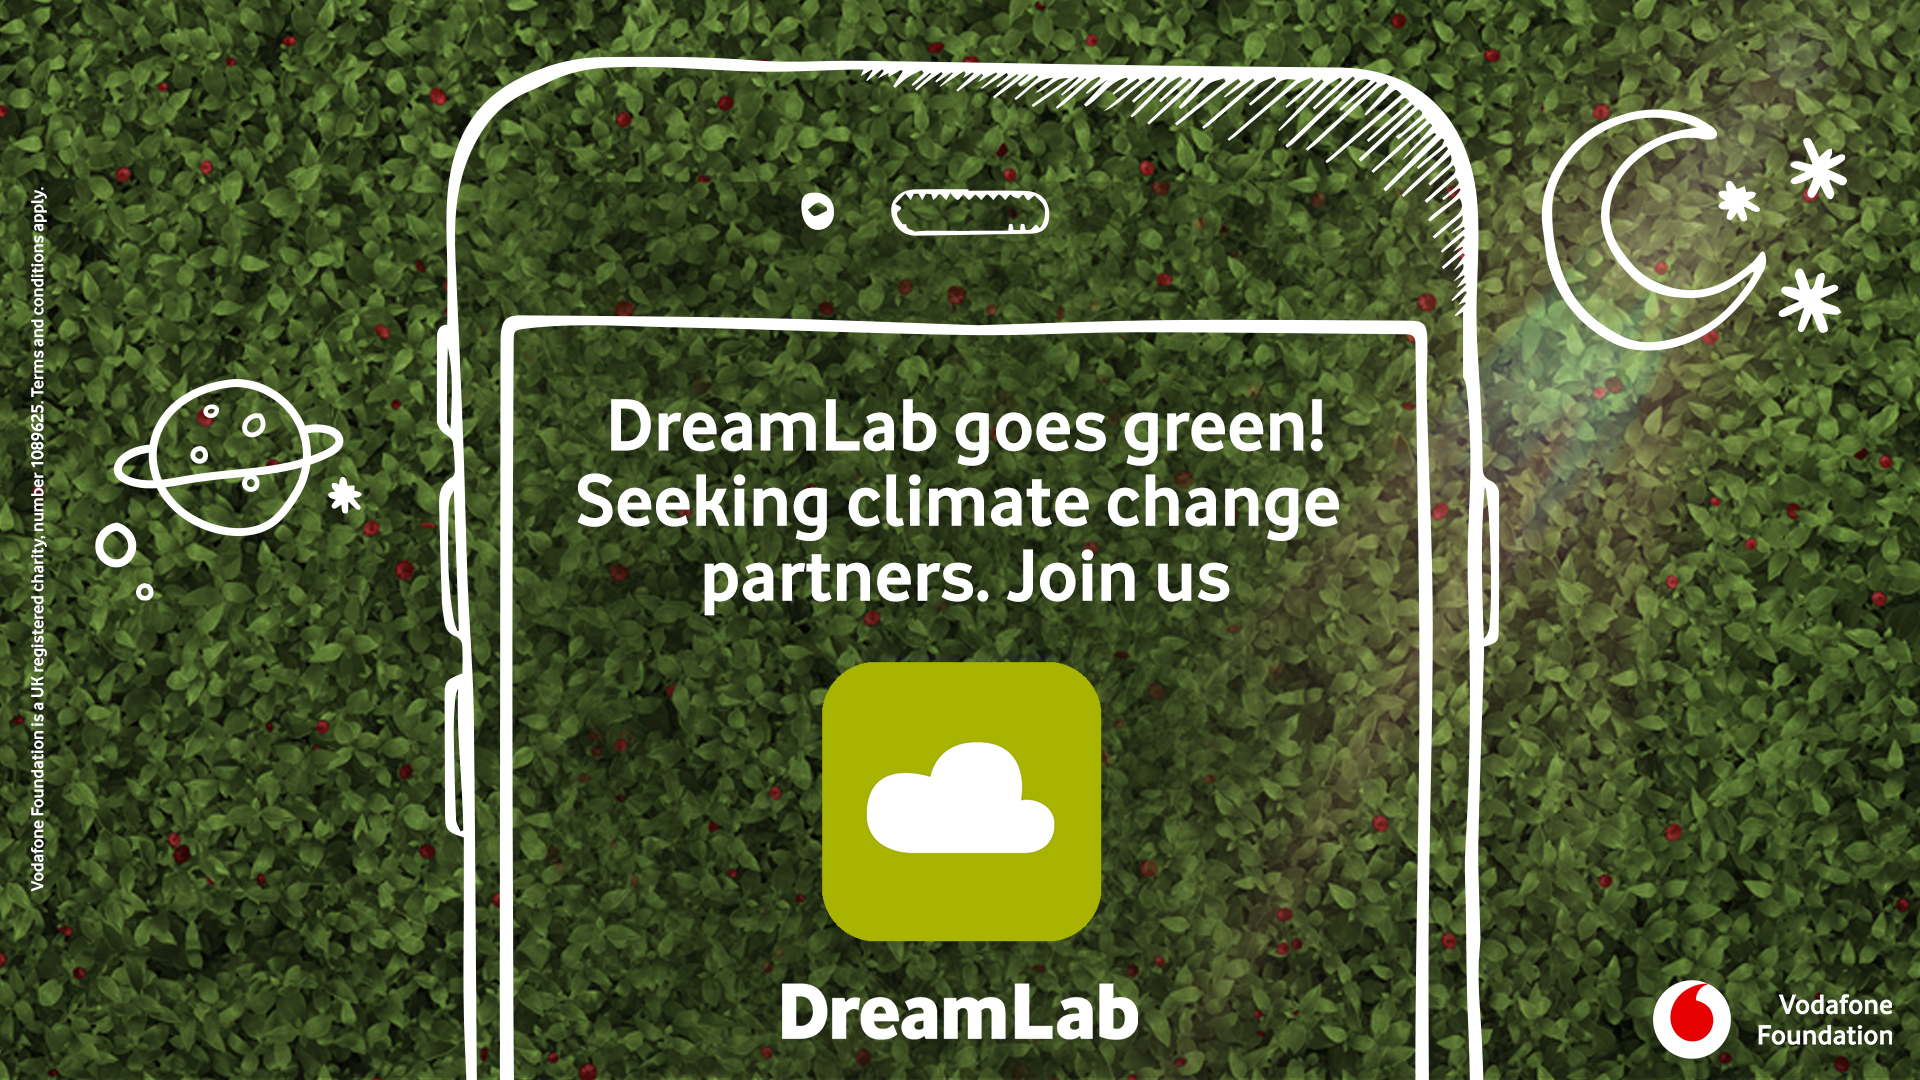 Vodafone Foundation and DreamLab seek new partner for urgent climate research